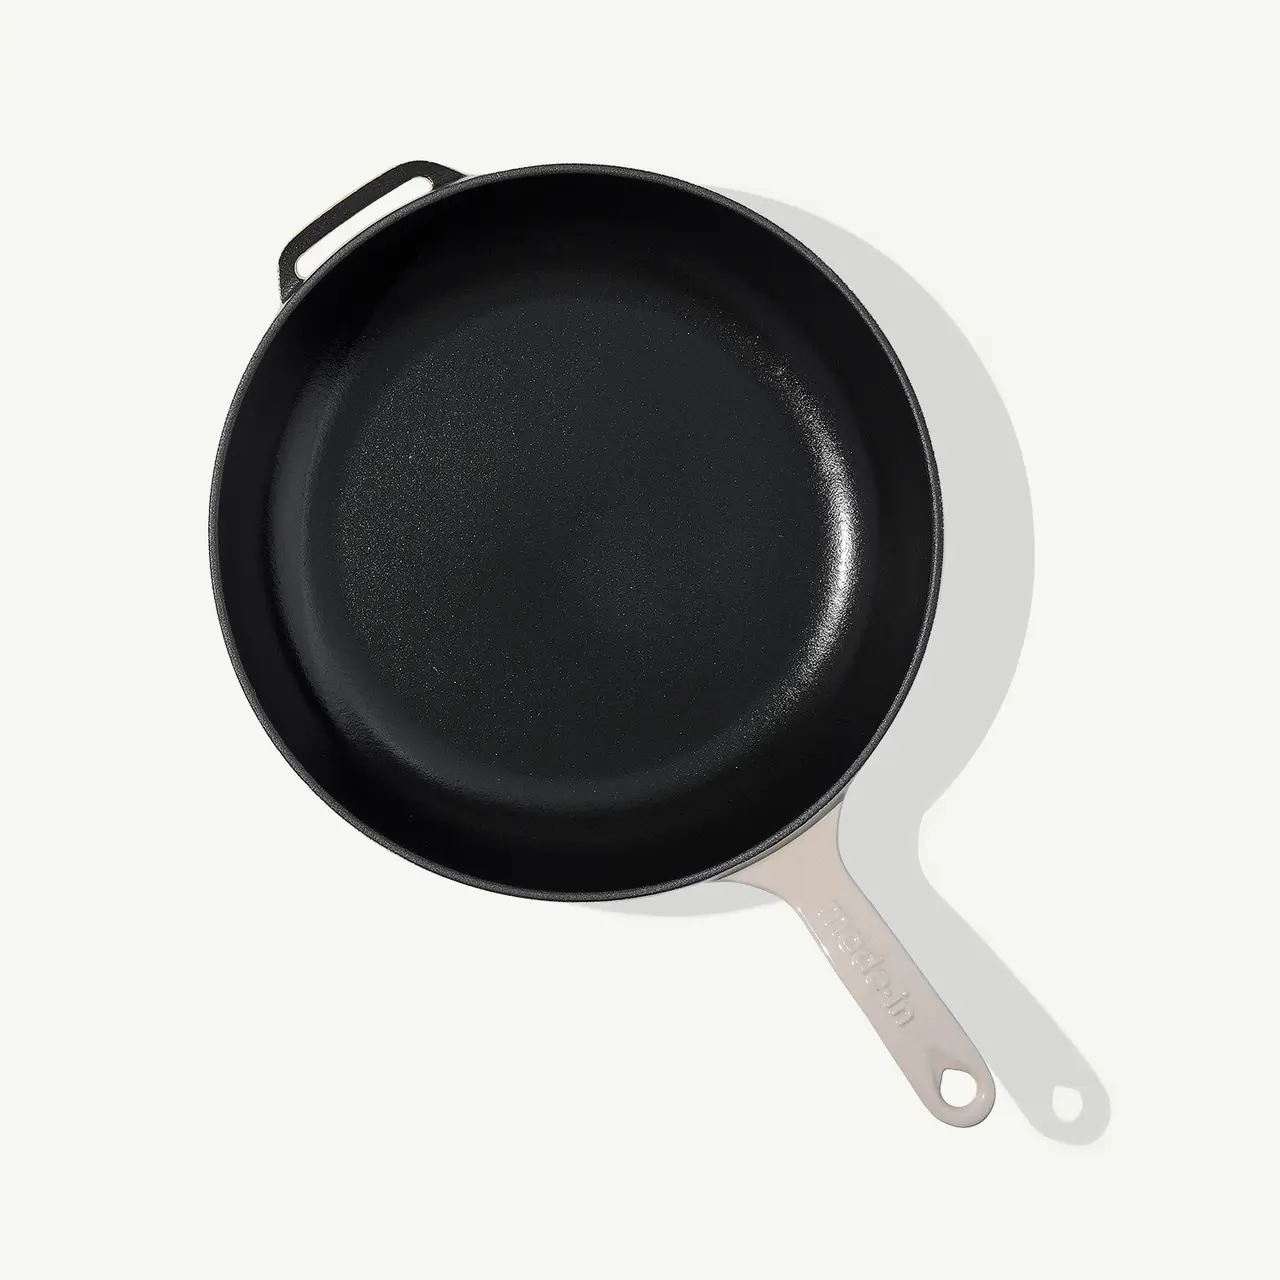 A cast iron skillet with a silver handle is shown from above on a light background.